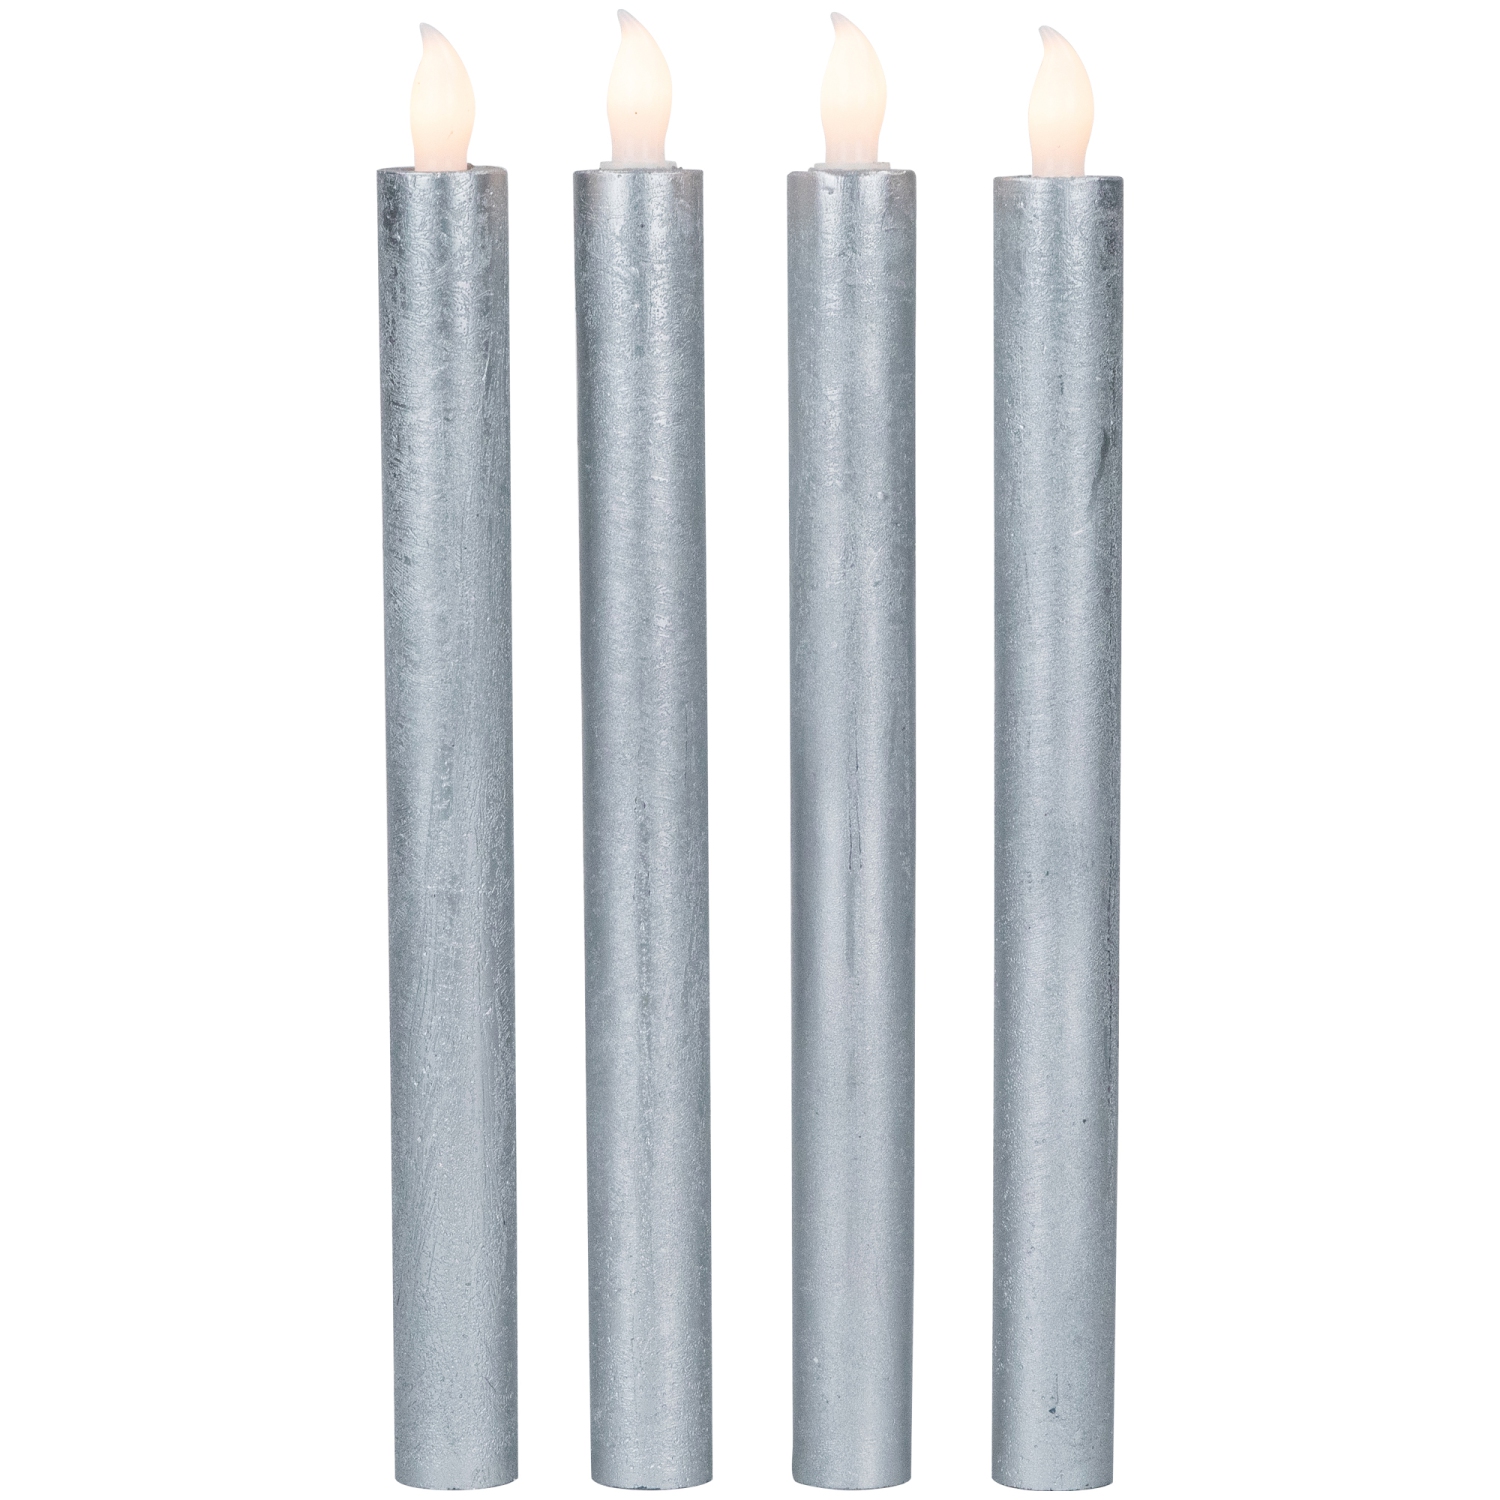 Set of 4 Brushed Silver-tone LED Flameless Wax Flickering Taper Candles 9.5"